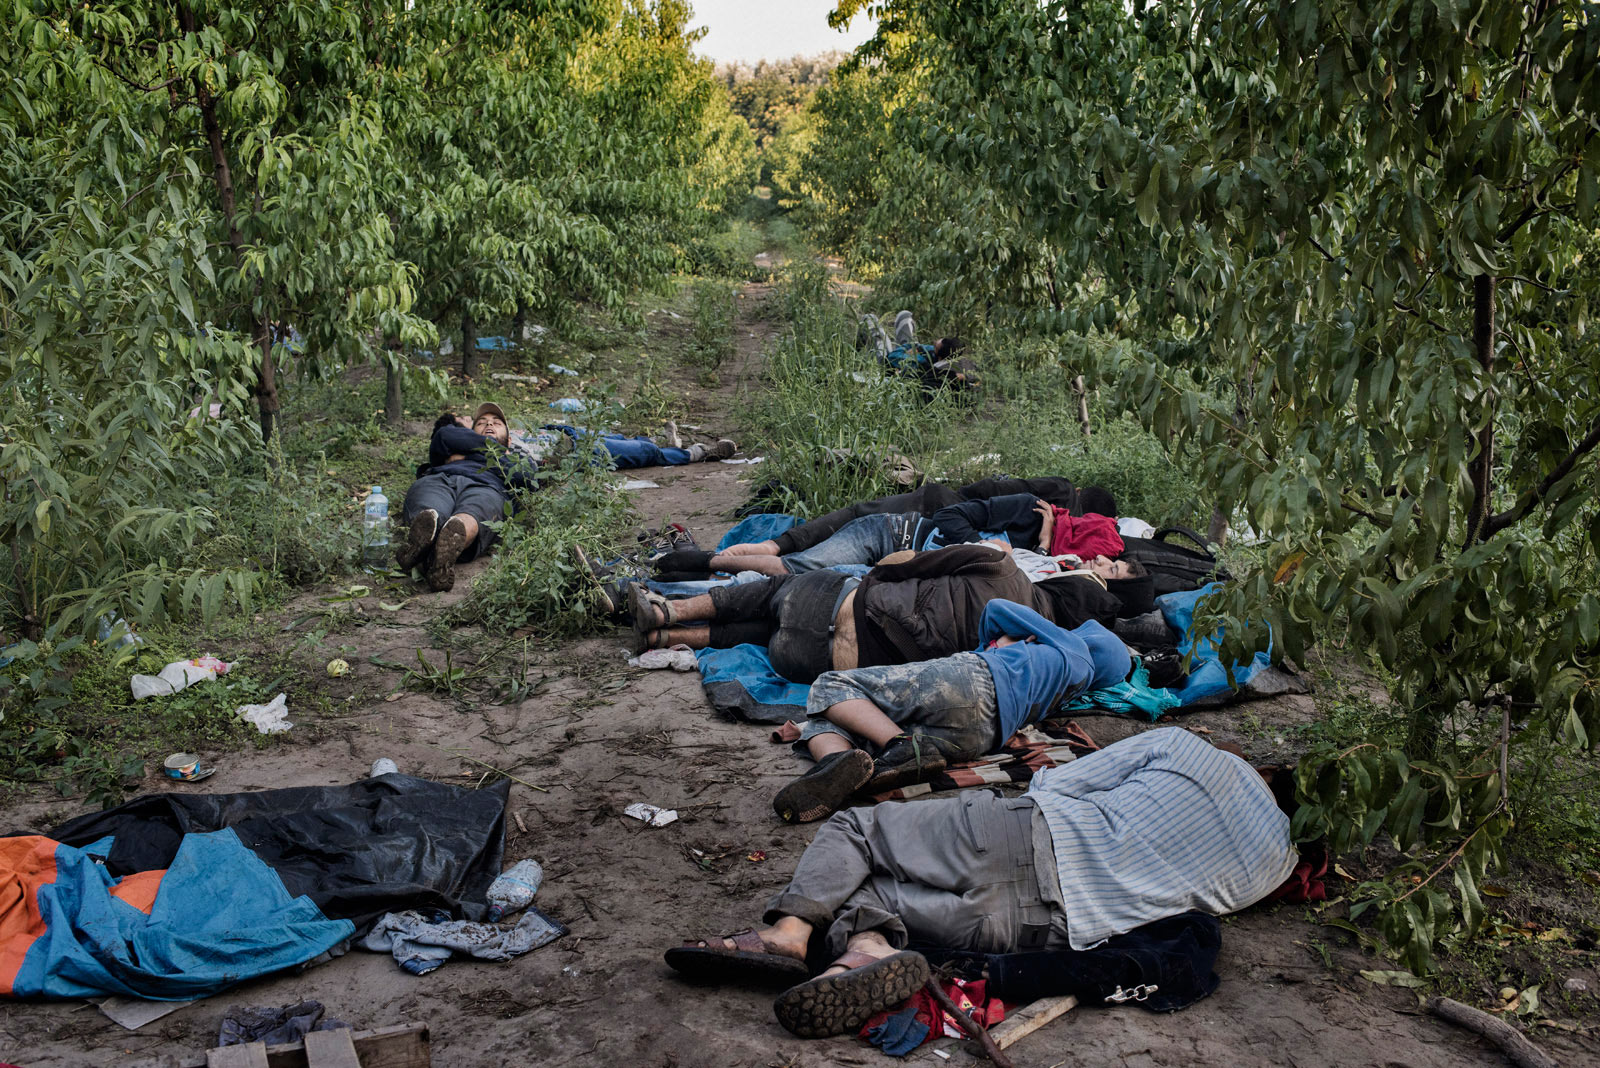 A group of migrants takes a rest before crossing into the European Union through the border between Serbia and Hungary. 
                              Roszke, Hungary, Aug. 30, 2015.